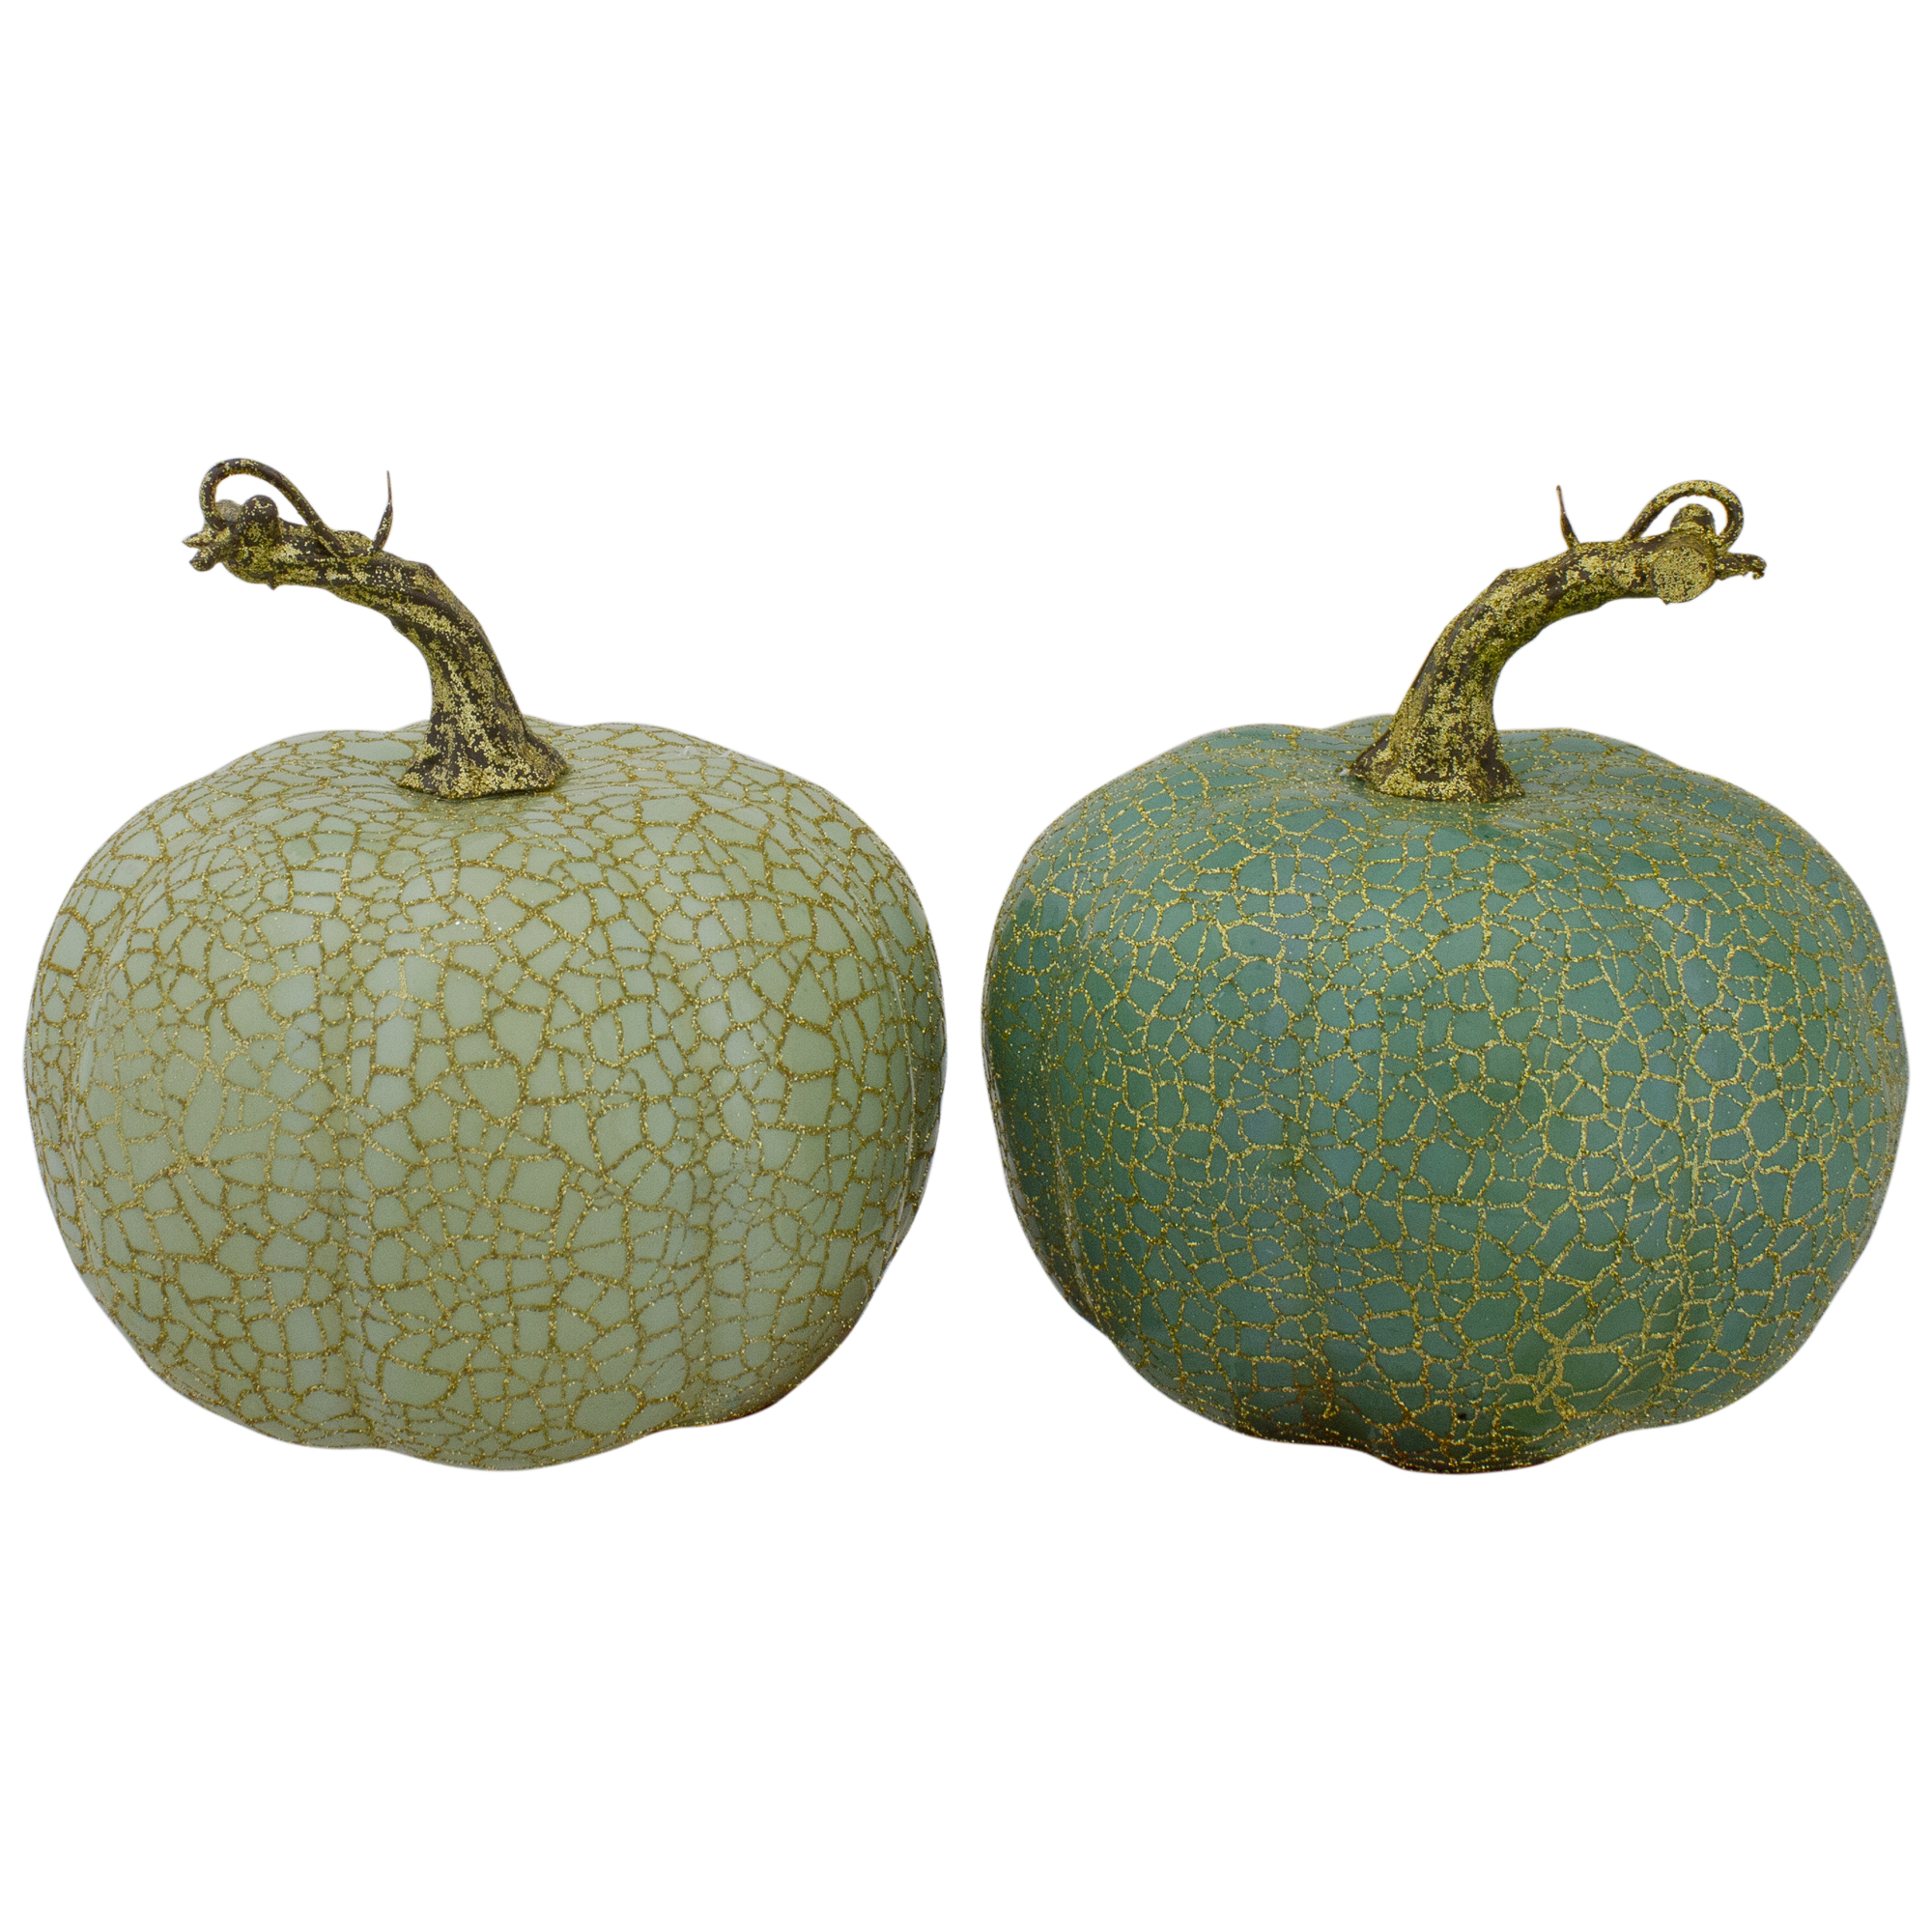 Northlight Set of 2 Green and Gold Crackle Fall Harvest Tabletop Thanksgiving Pumpkins, 5-Inch